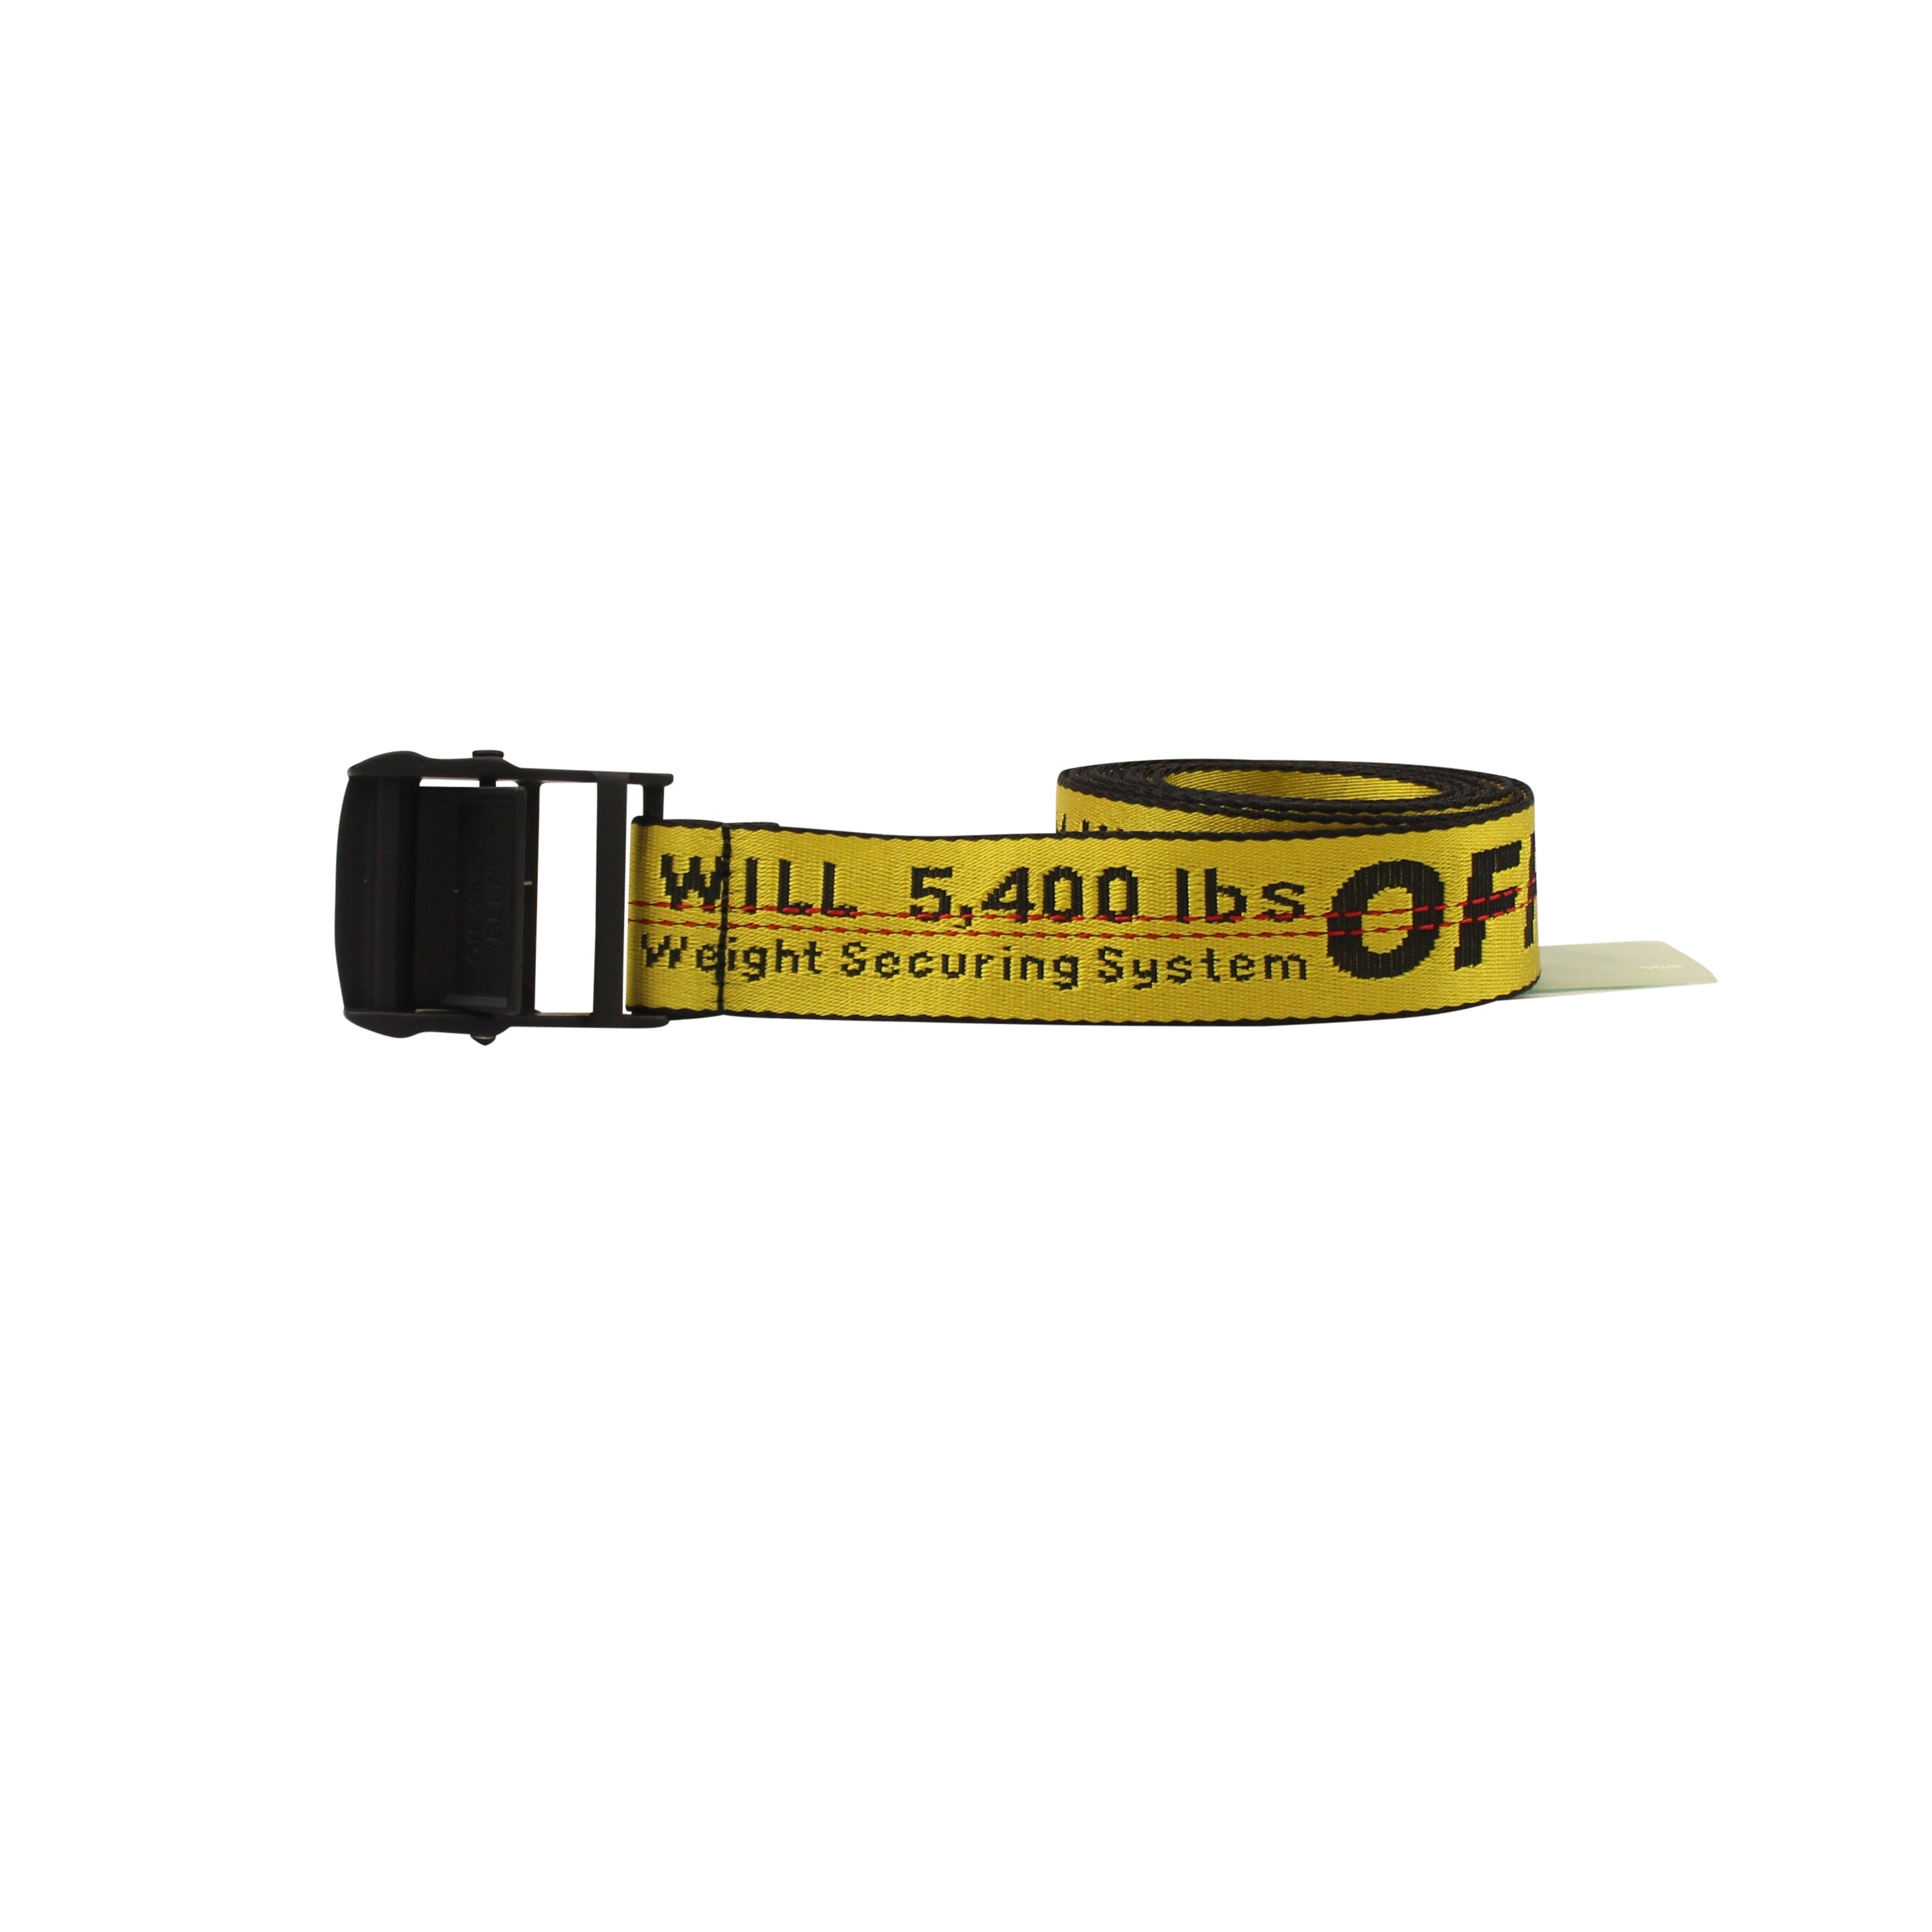 Off-white Yellow Classic Industrial Belt